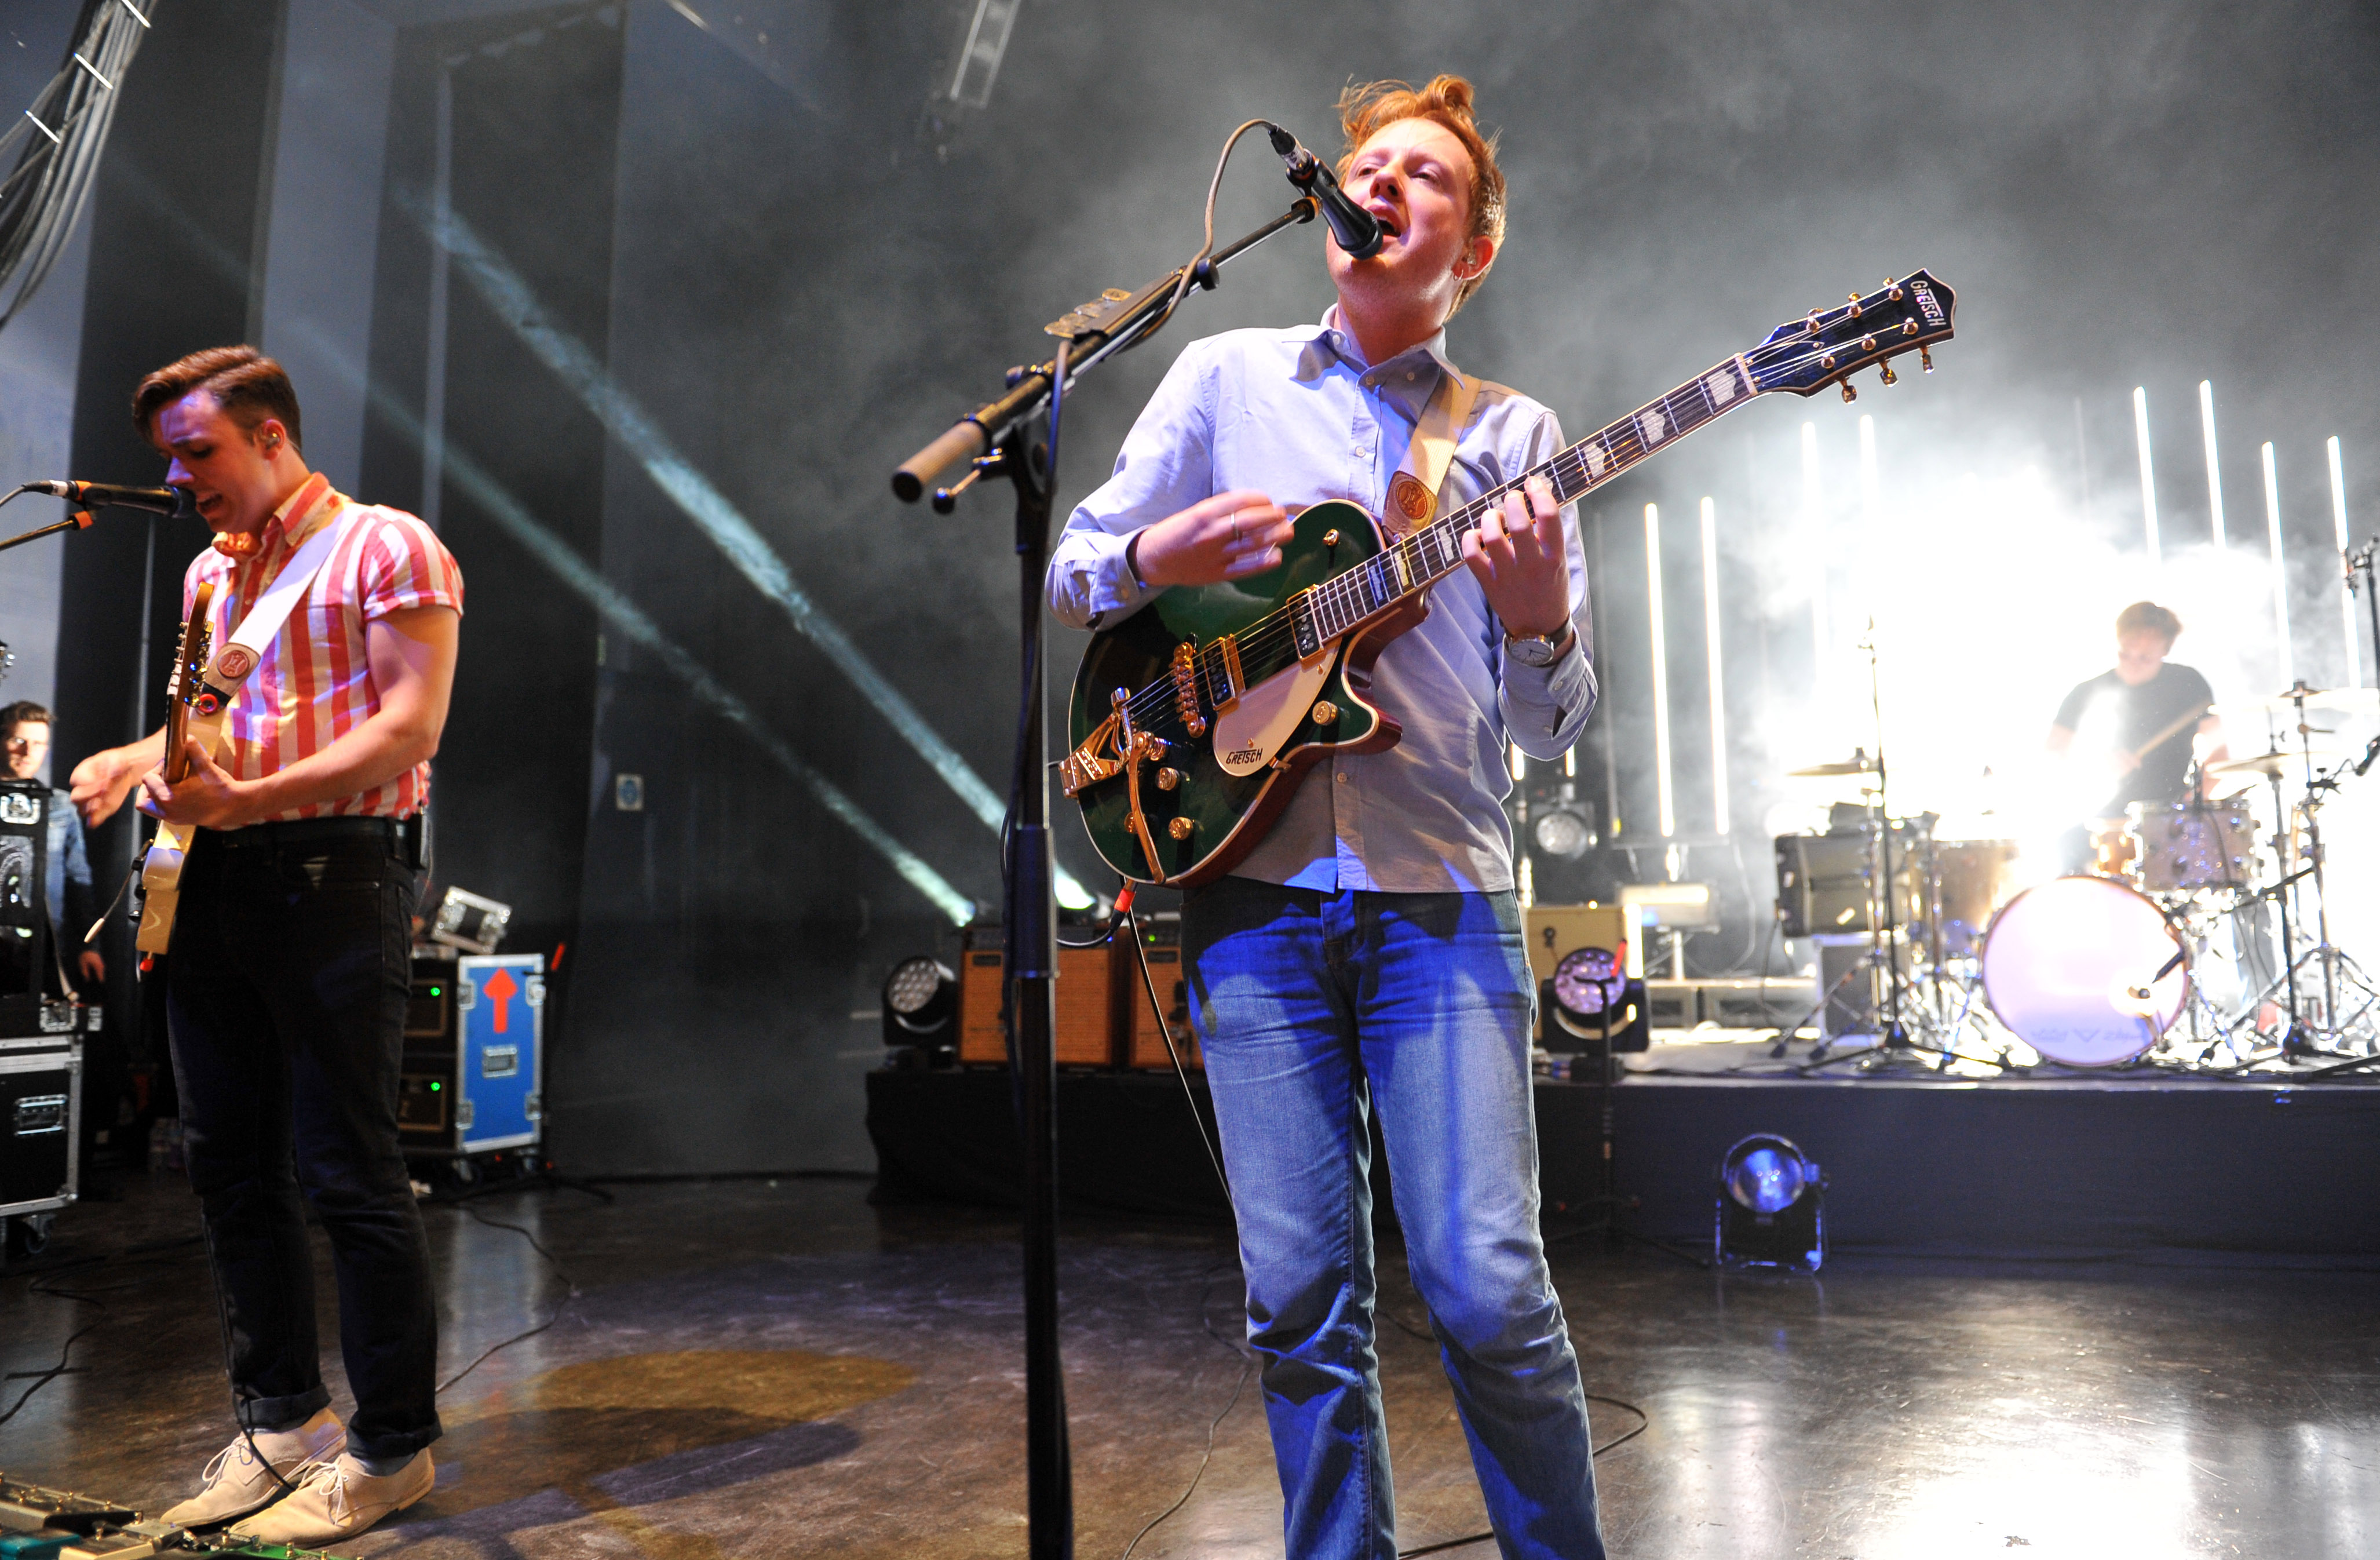 Sam Halliday, Alex Trimble and Benjamin Thompson of Two Door Cinema Club perform on stage at Shepherds Bush Empire on September 6, 2012 in London, United Kingdom.